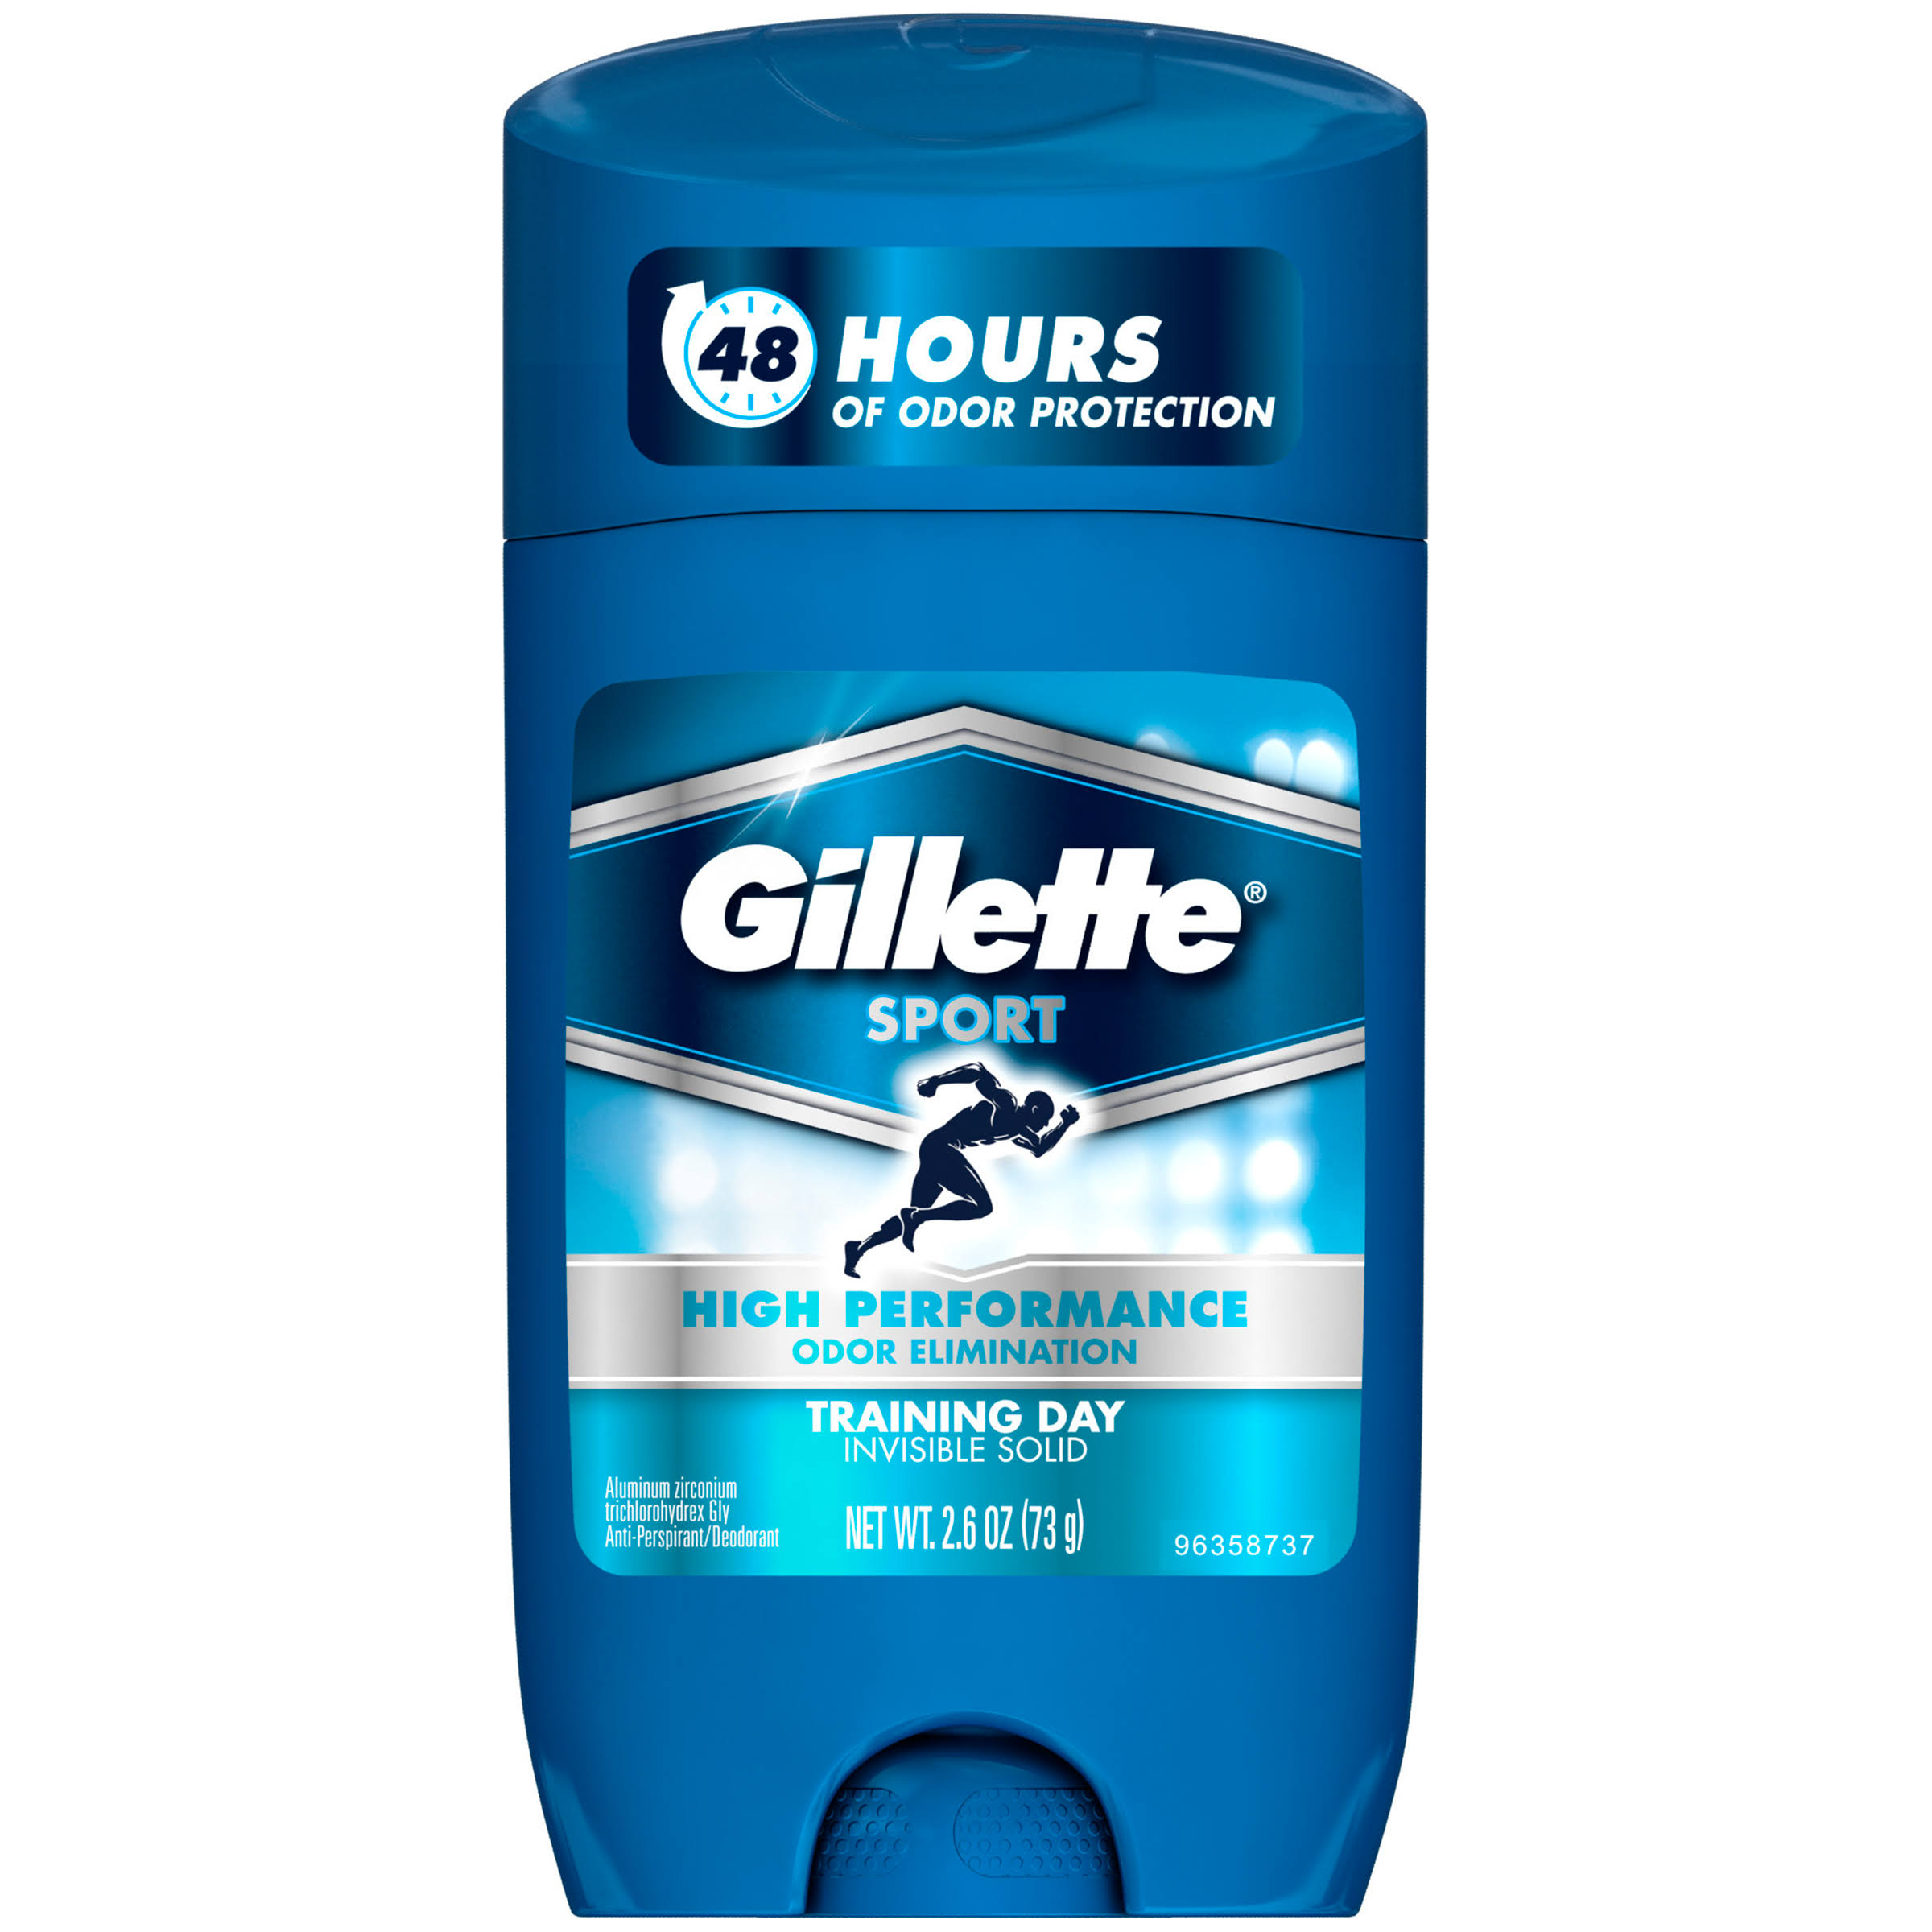 Gillette Invisible Solid Anti Perspirant and Deodorant - Training Day, 2.6oz